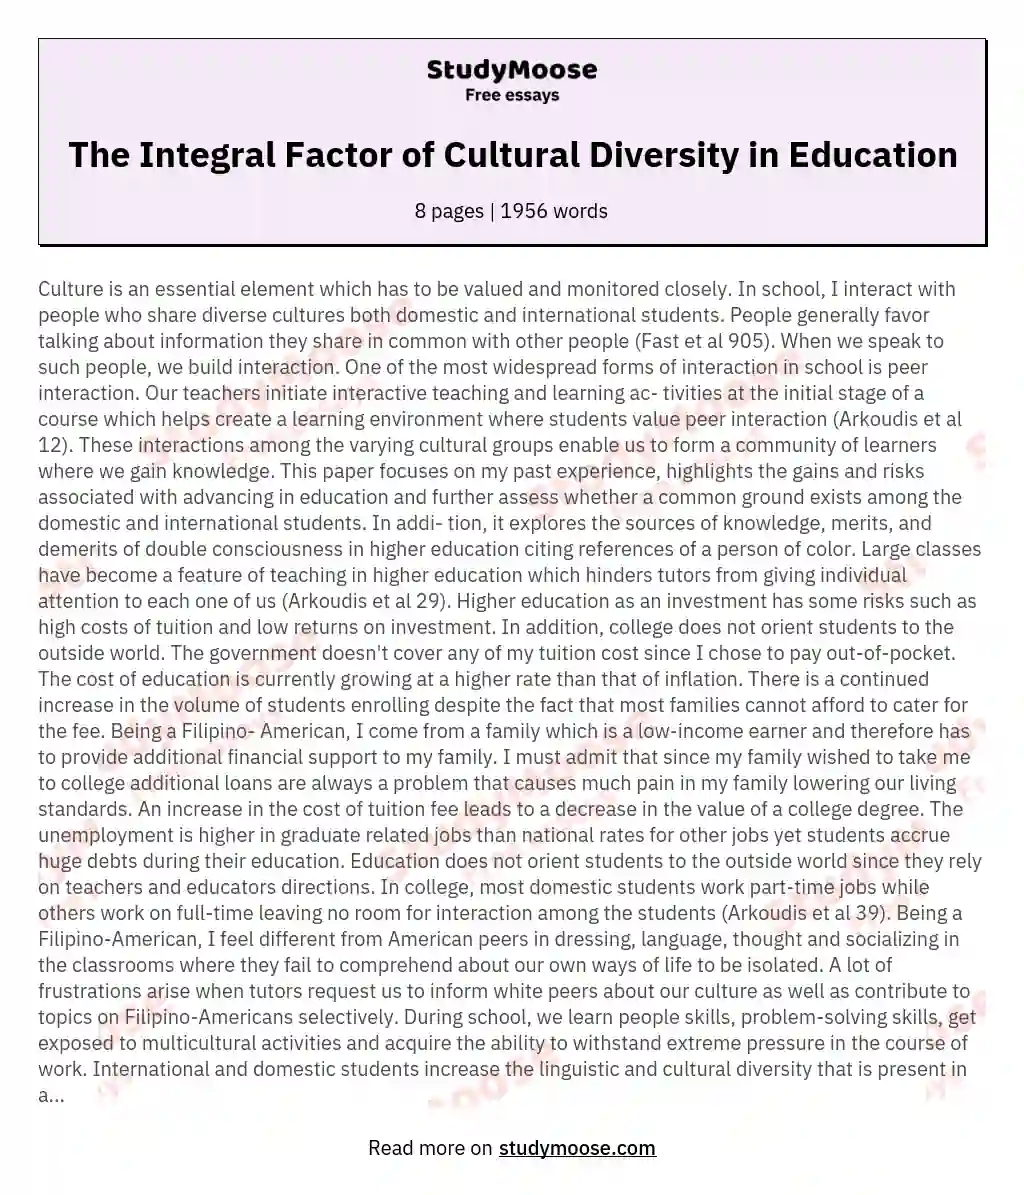 The Integral Factor of Cultural Diversity in Education essay